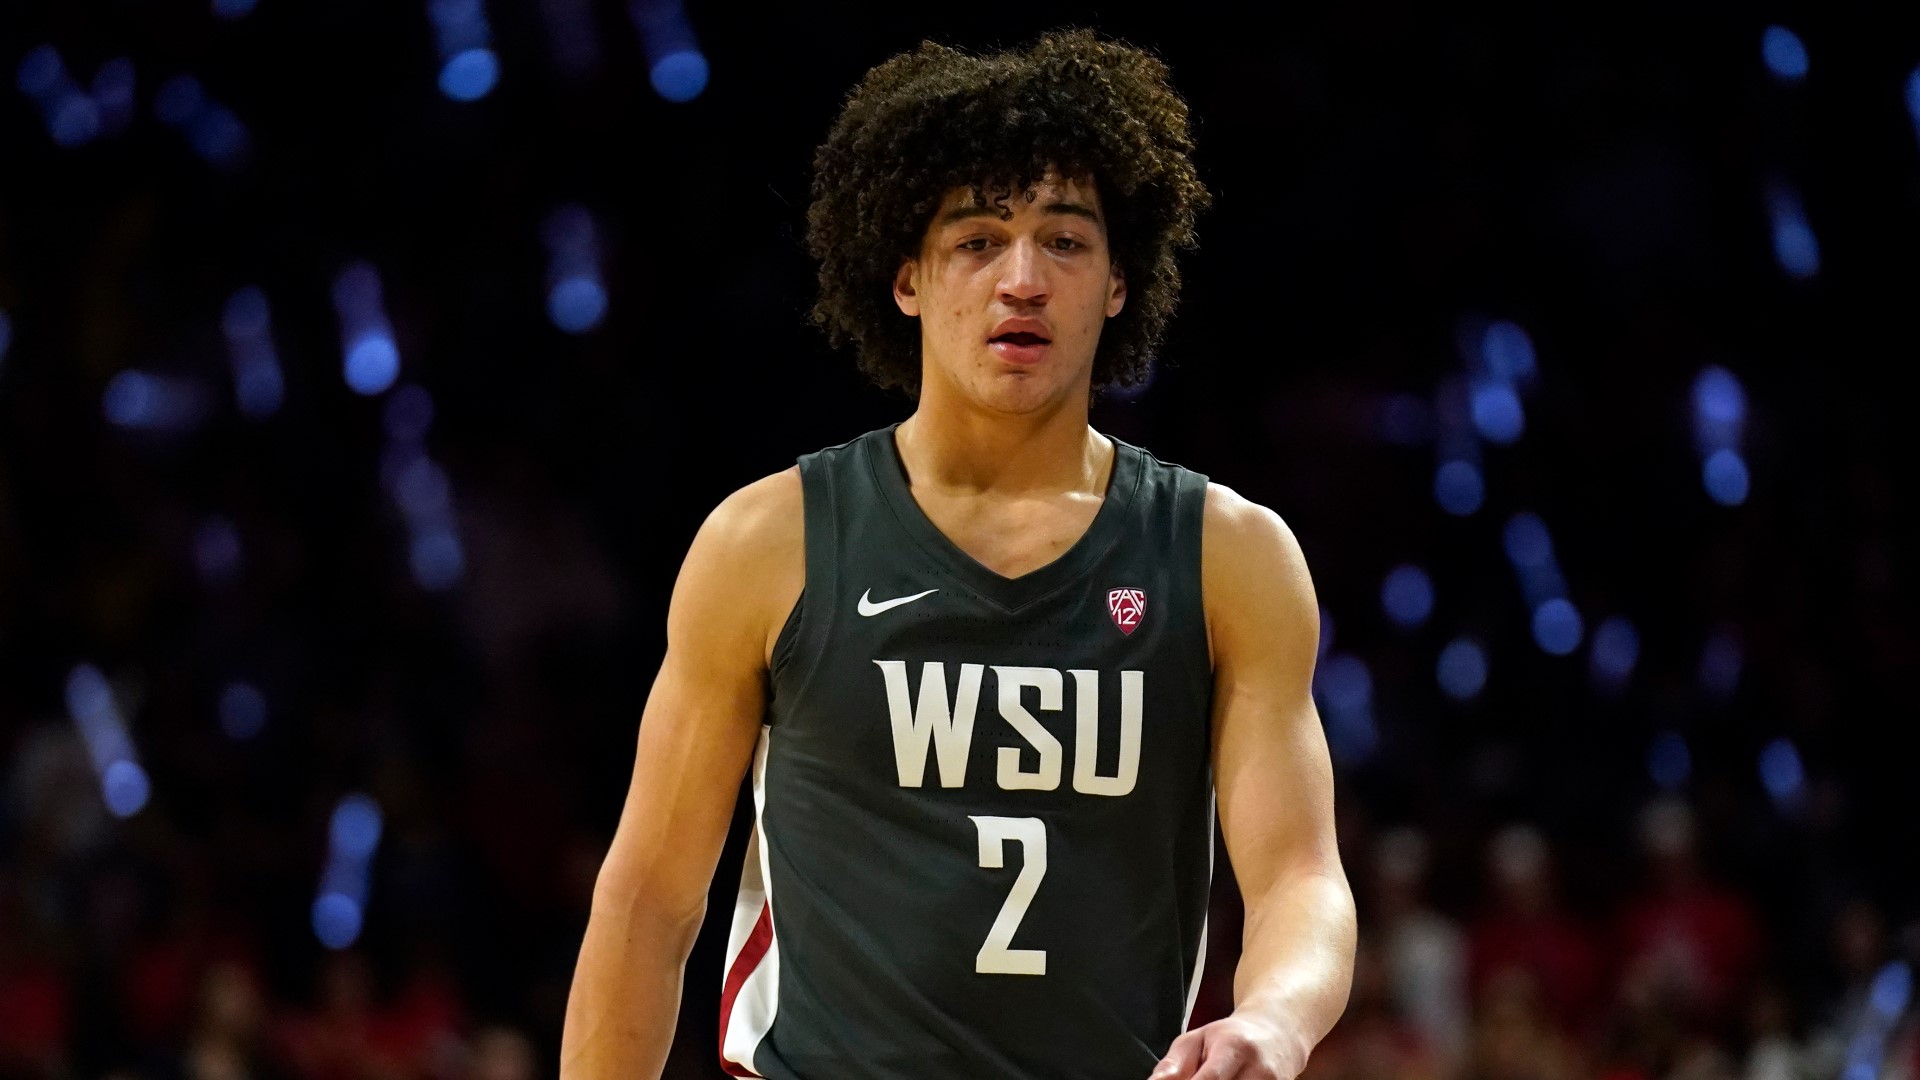 Elleby became the first WSU player drafted into the NBA since Klay Thompson in 2011 on Wednesday night.